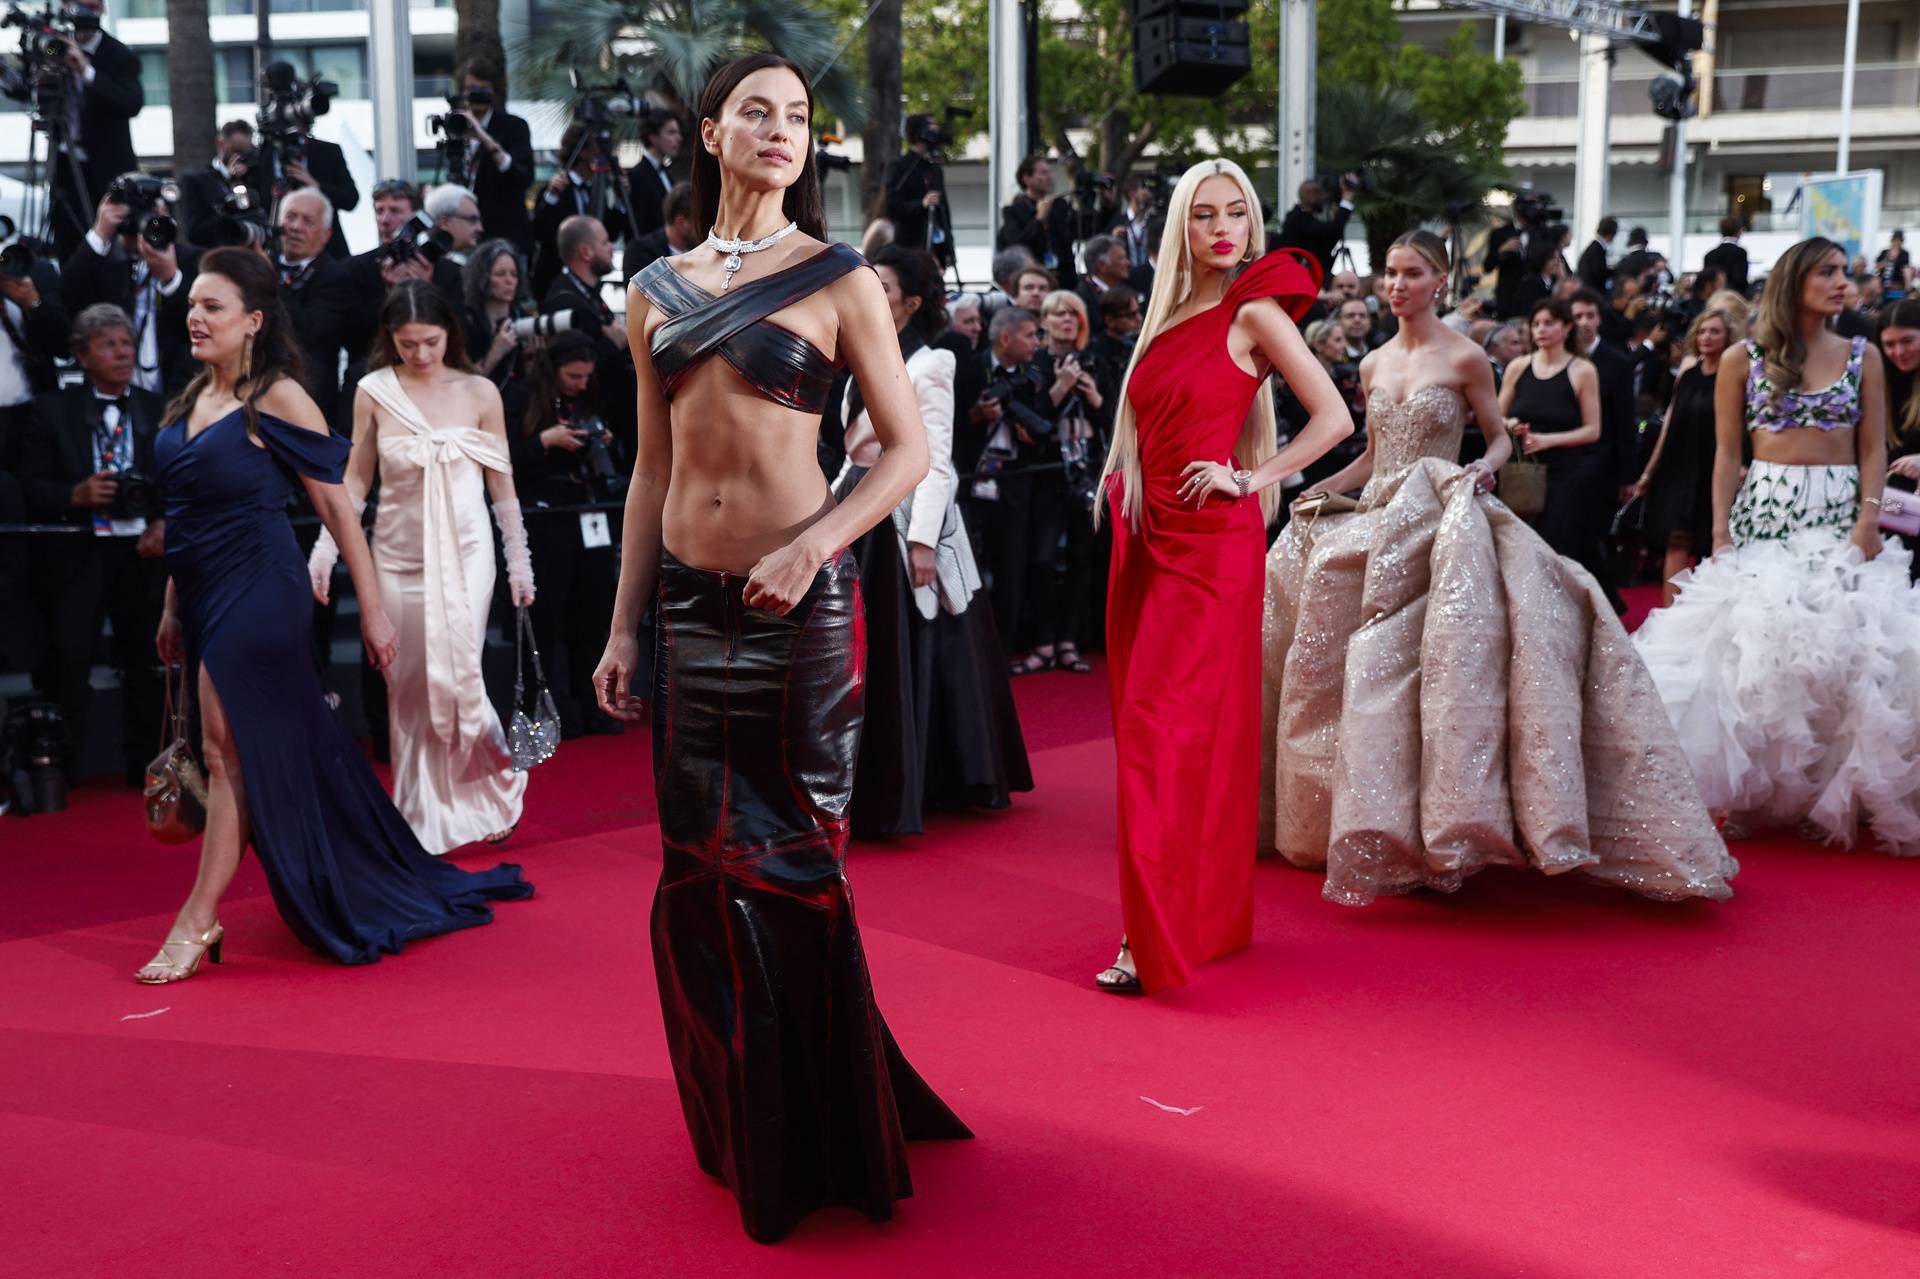 The 76th Cannes Film Festival - Screening of the film "Firebrand" in competition - Red Carpet Arrivals